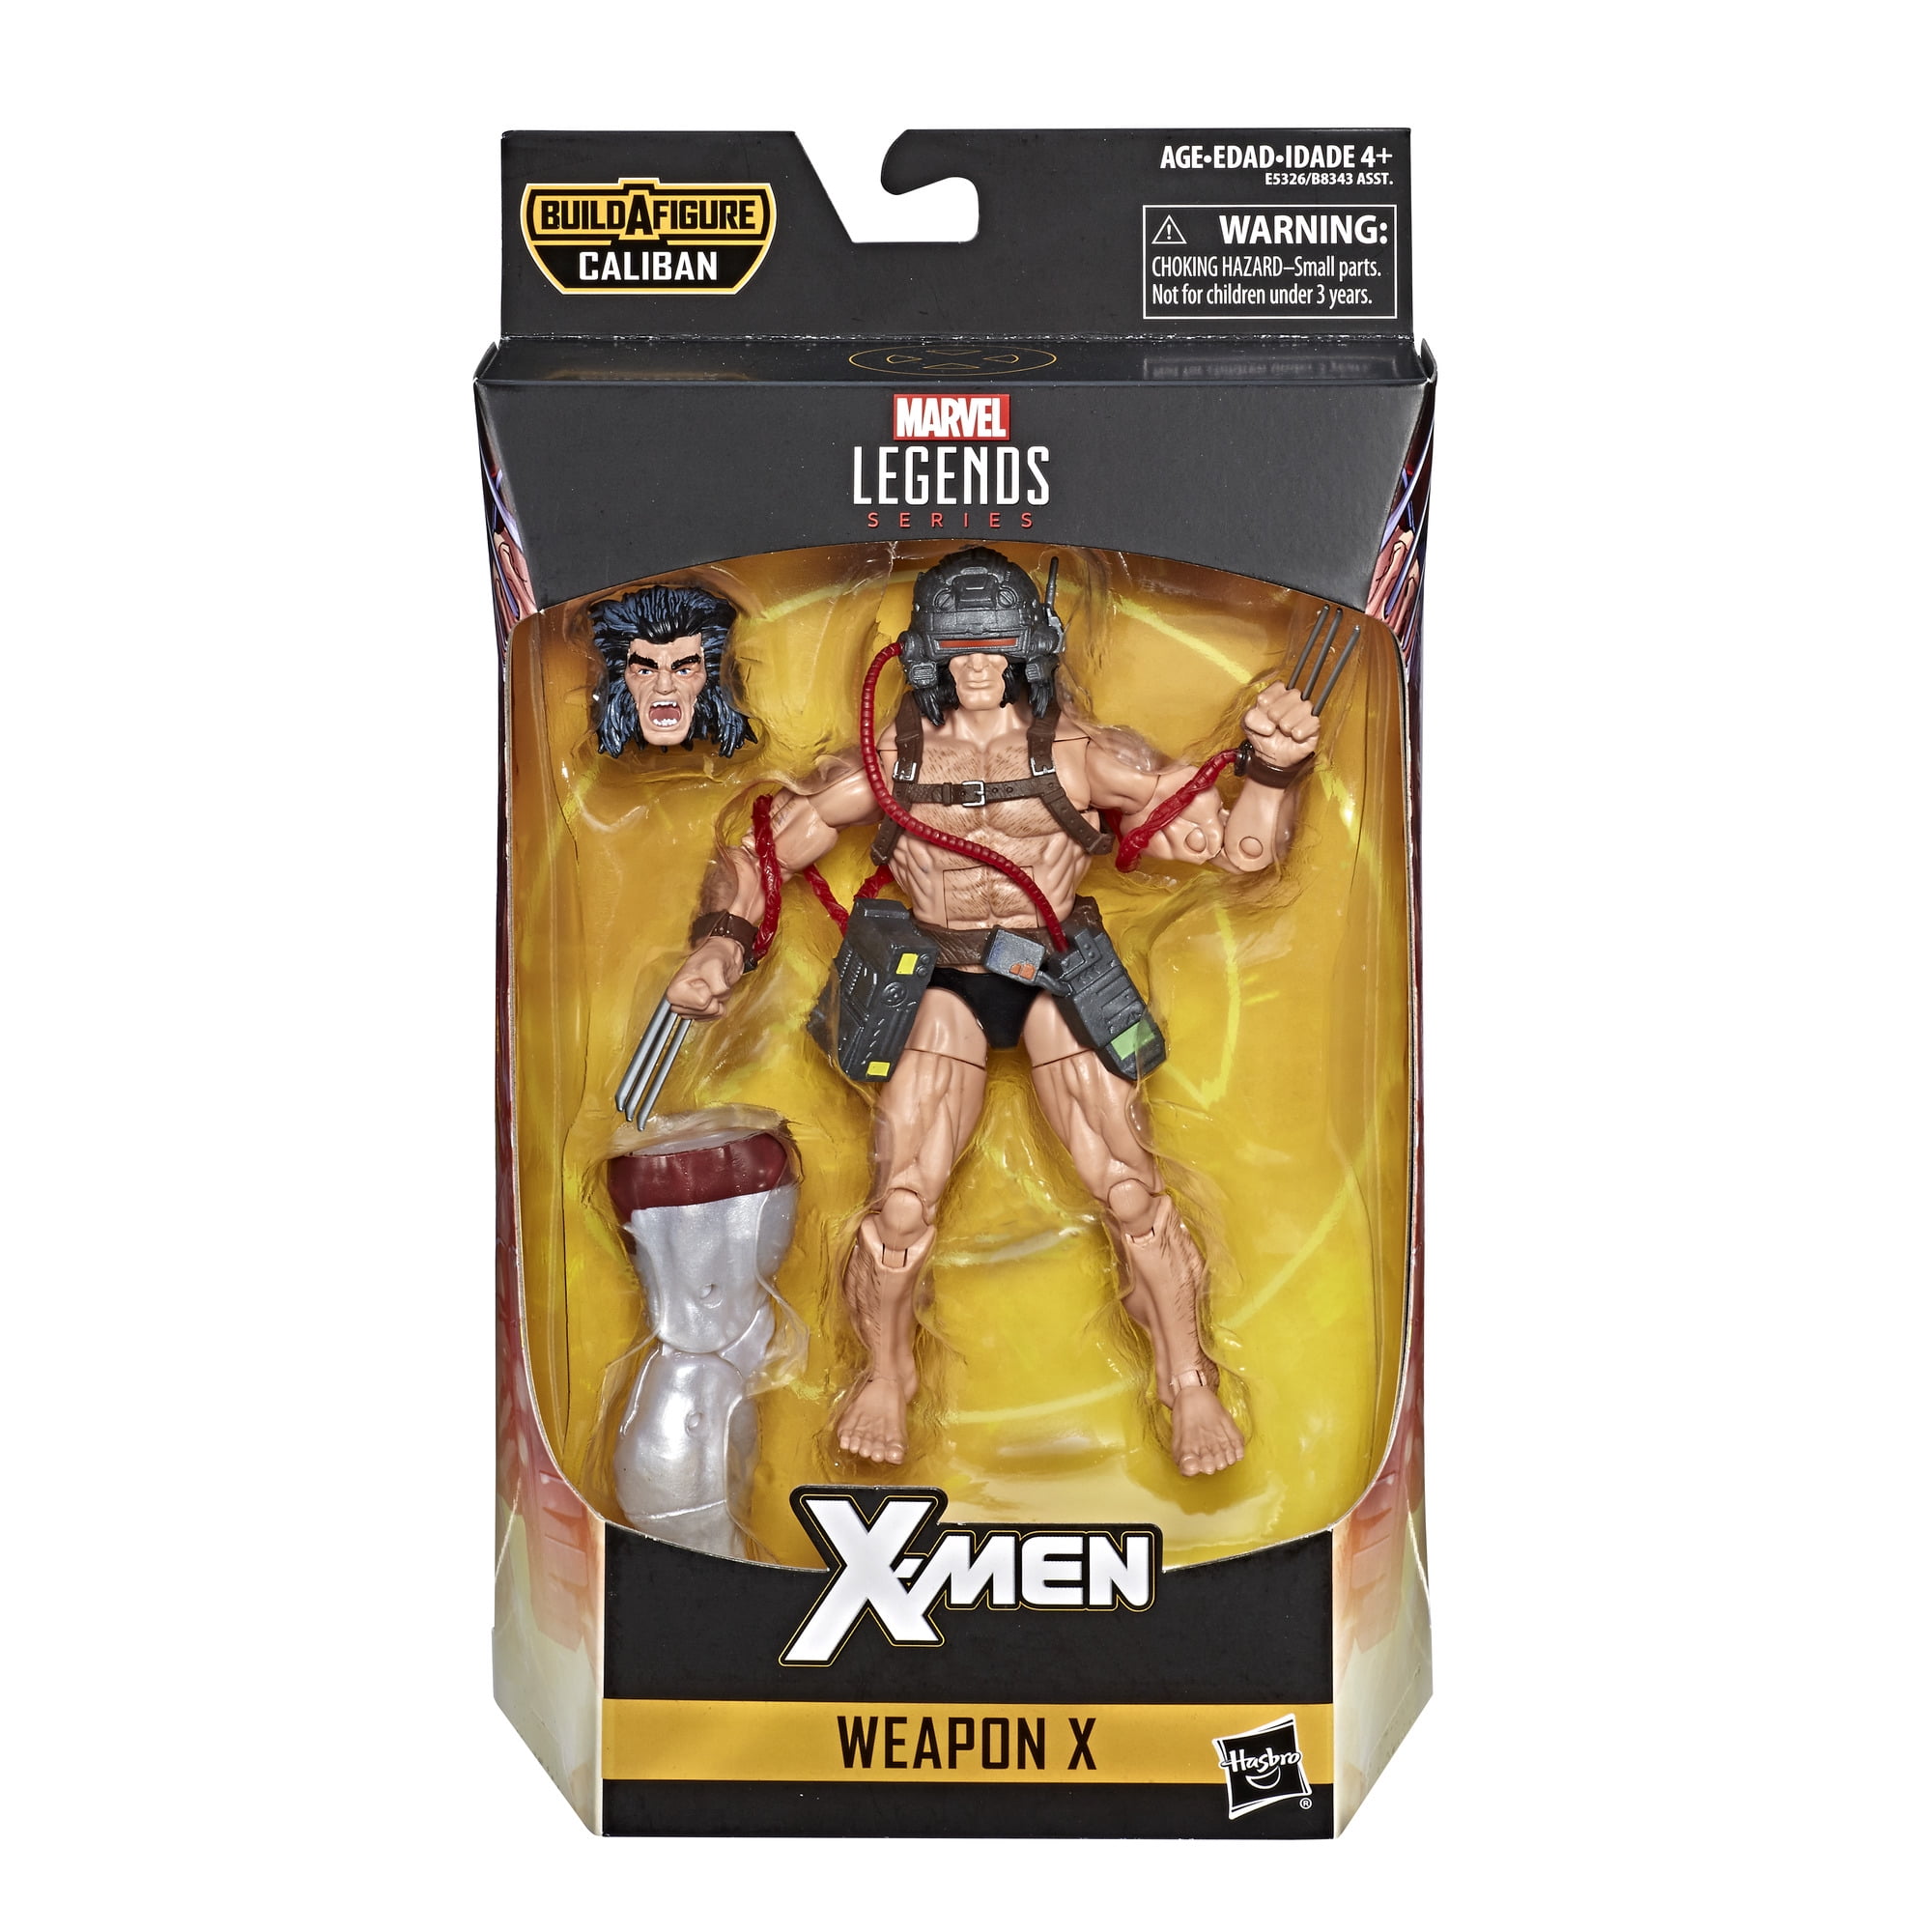 Weapon X 6in Hasbro Marvel Legends Series Action Figure for sale online E9170 